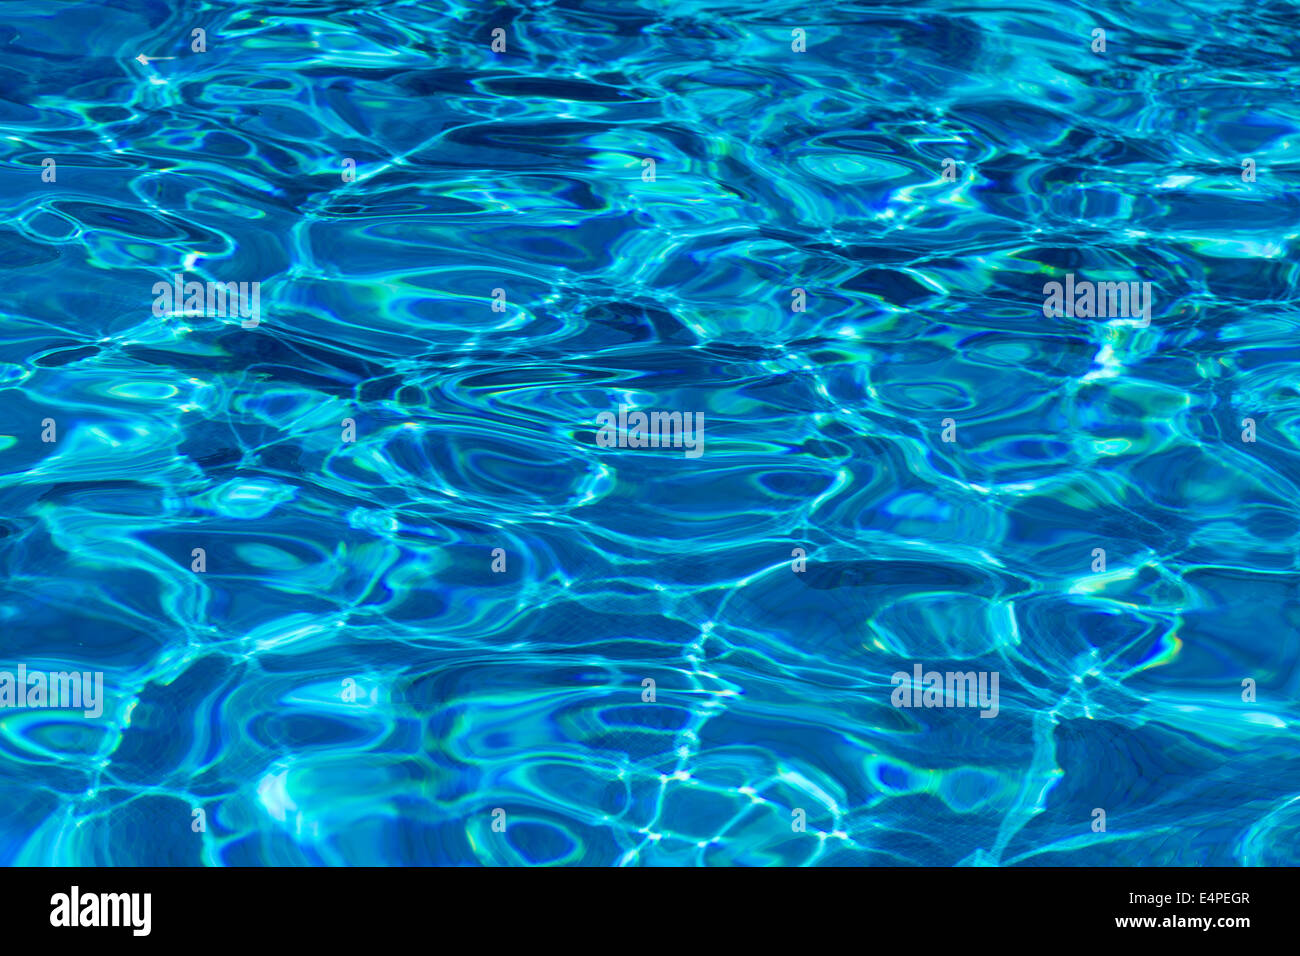 Water in a swimming pool, shimmering blue Stock Photo